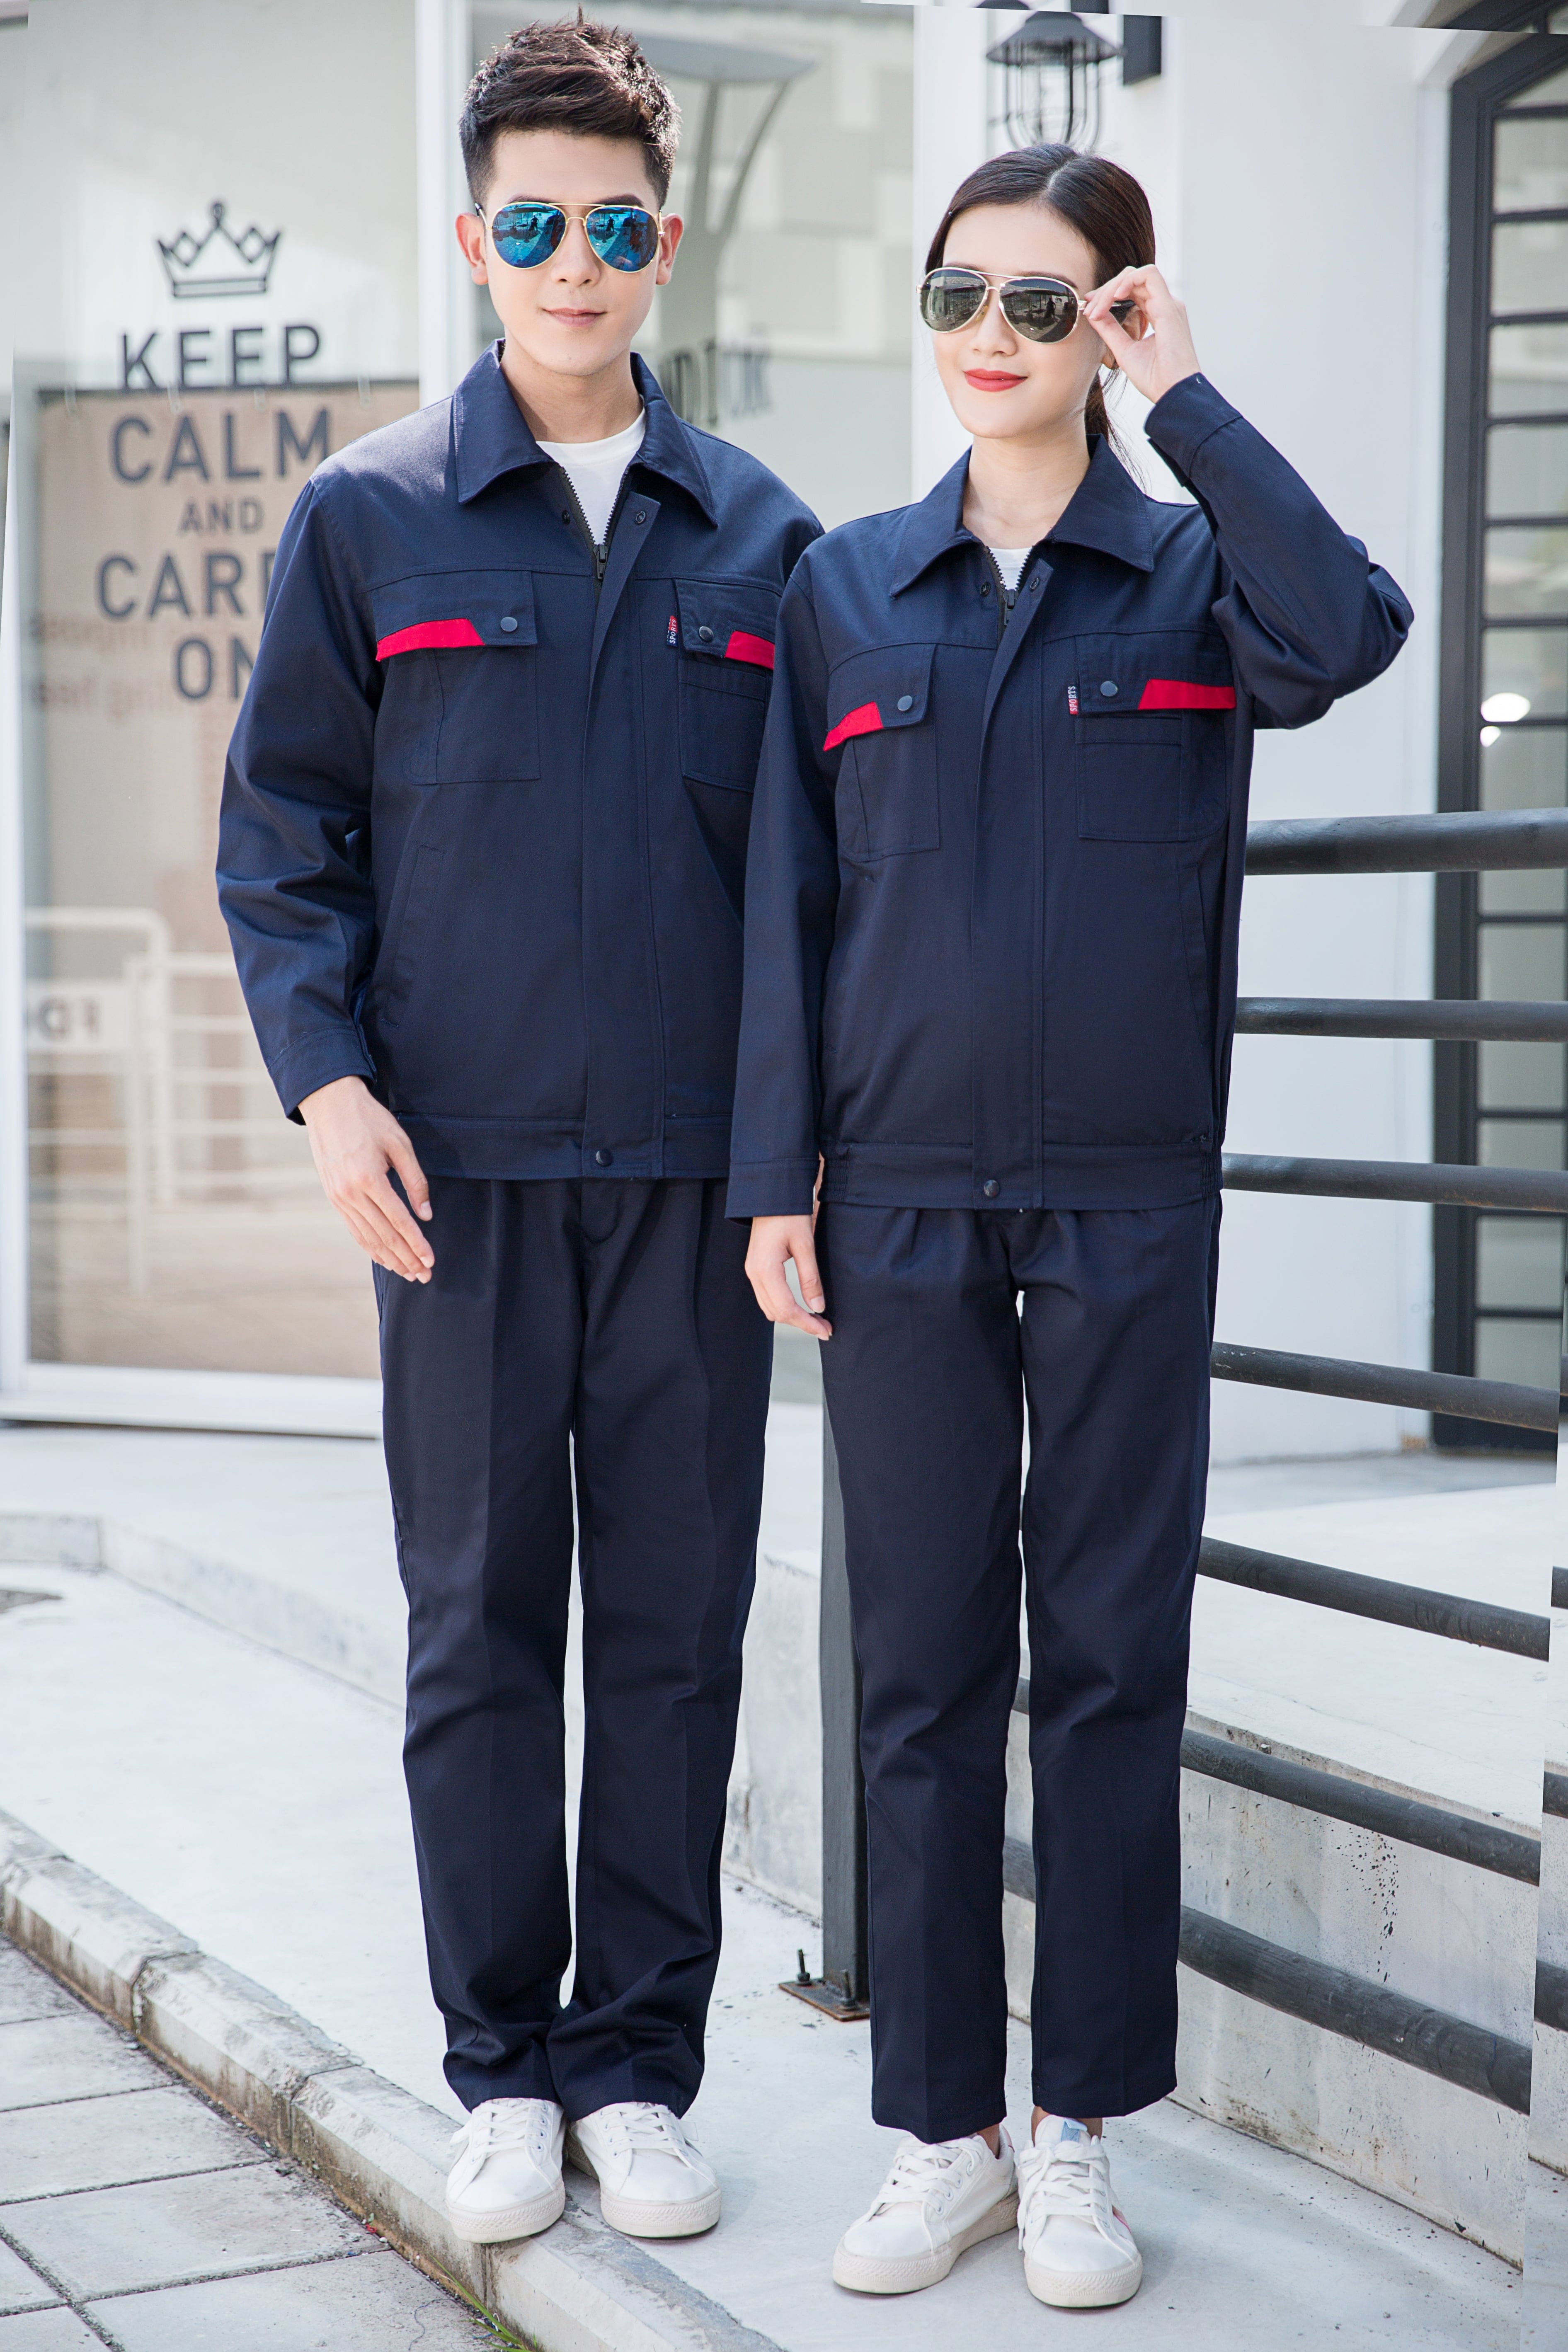 Corals Trading Co. 可樂思百貨商行 涤棉抗静电 Spring and Autumn style long-sleeved anti-static work clothes series SD-AS-W303